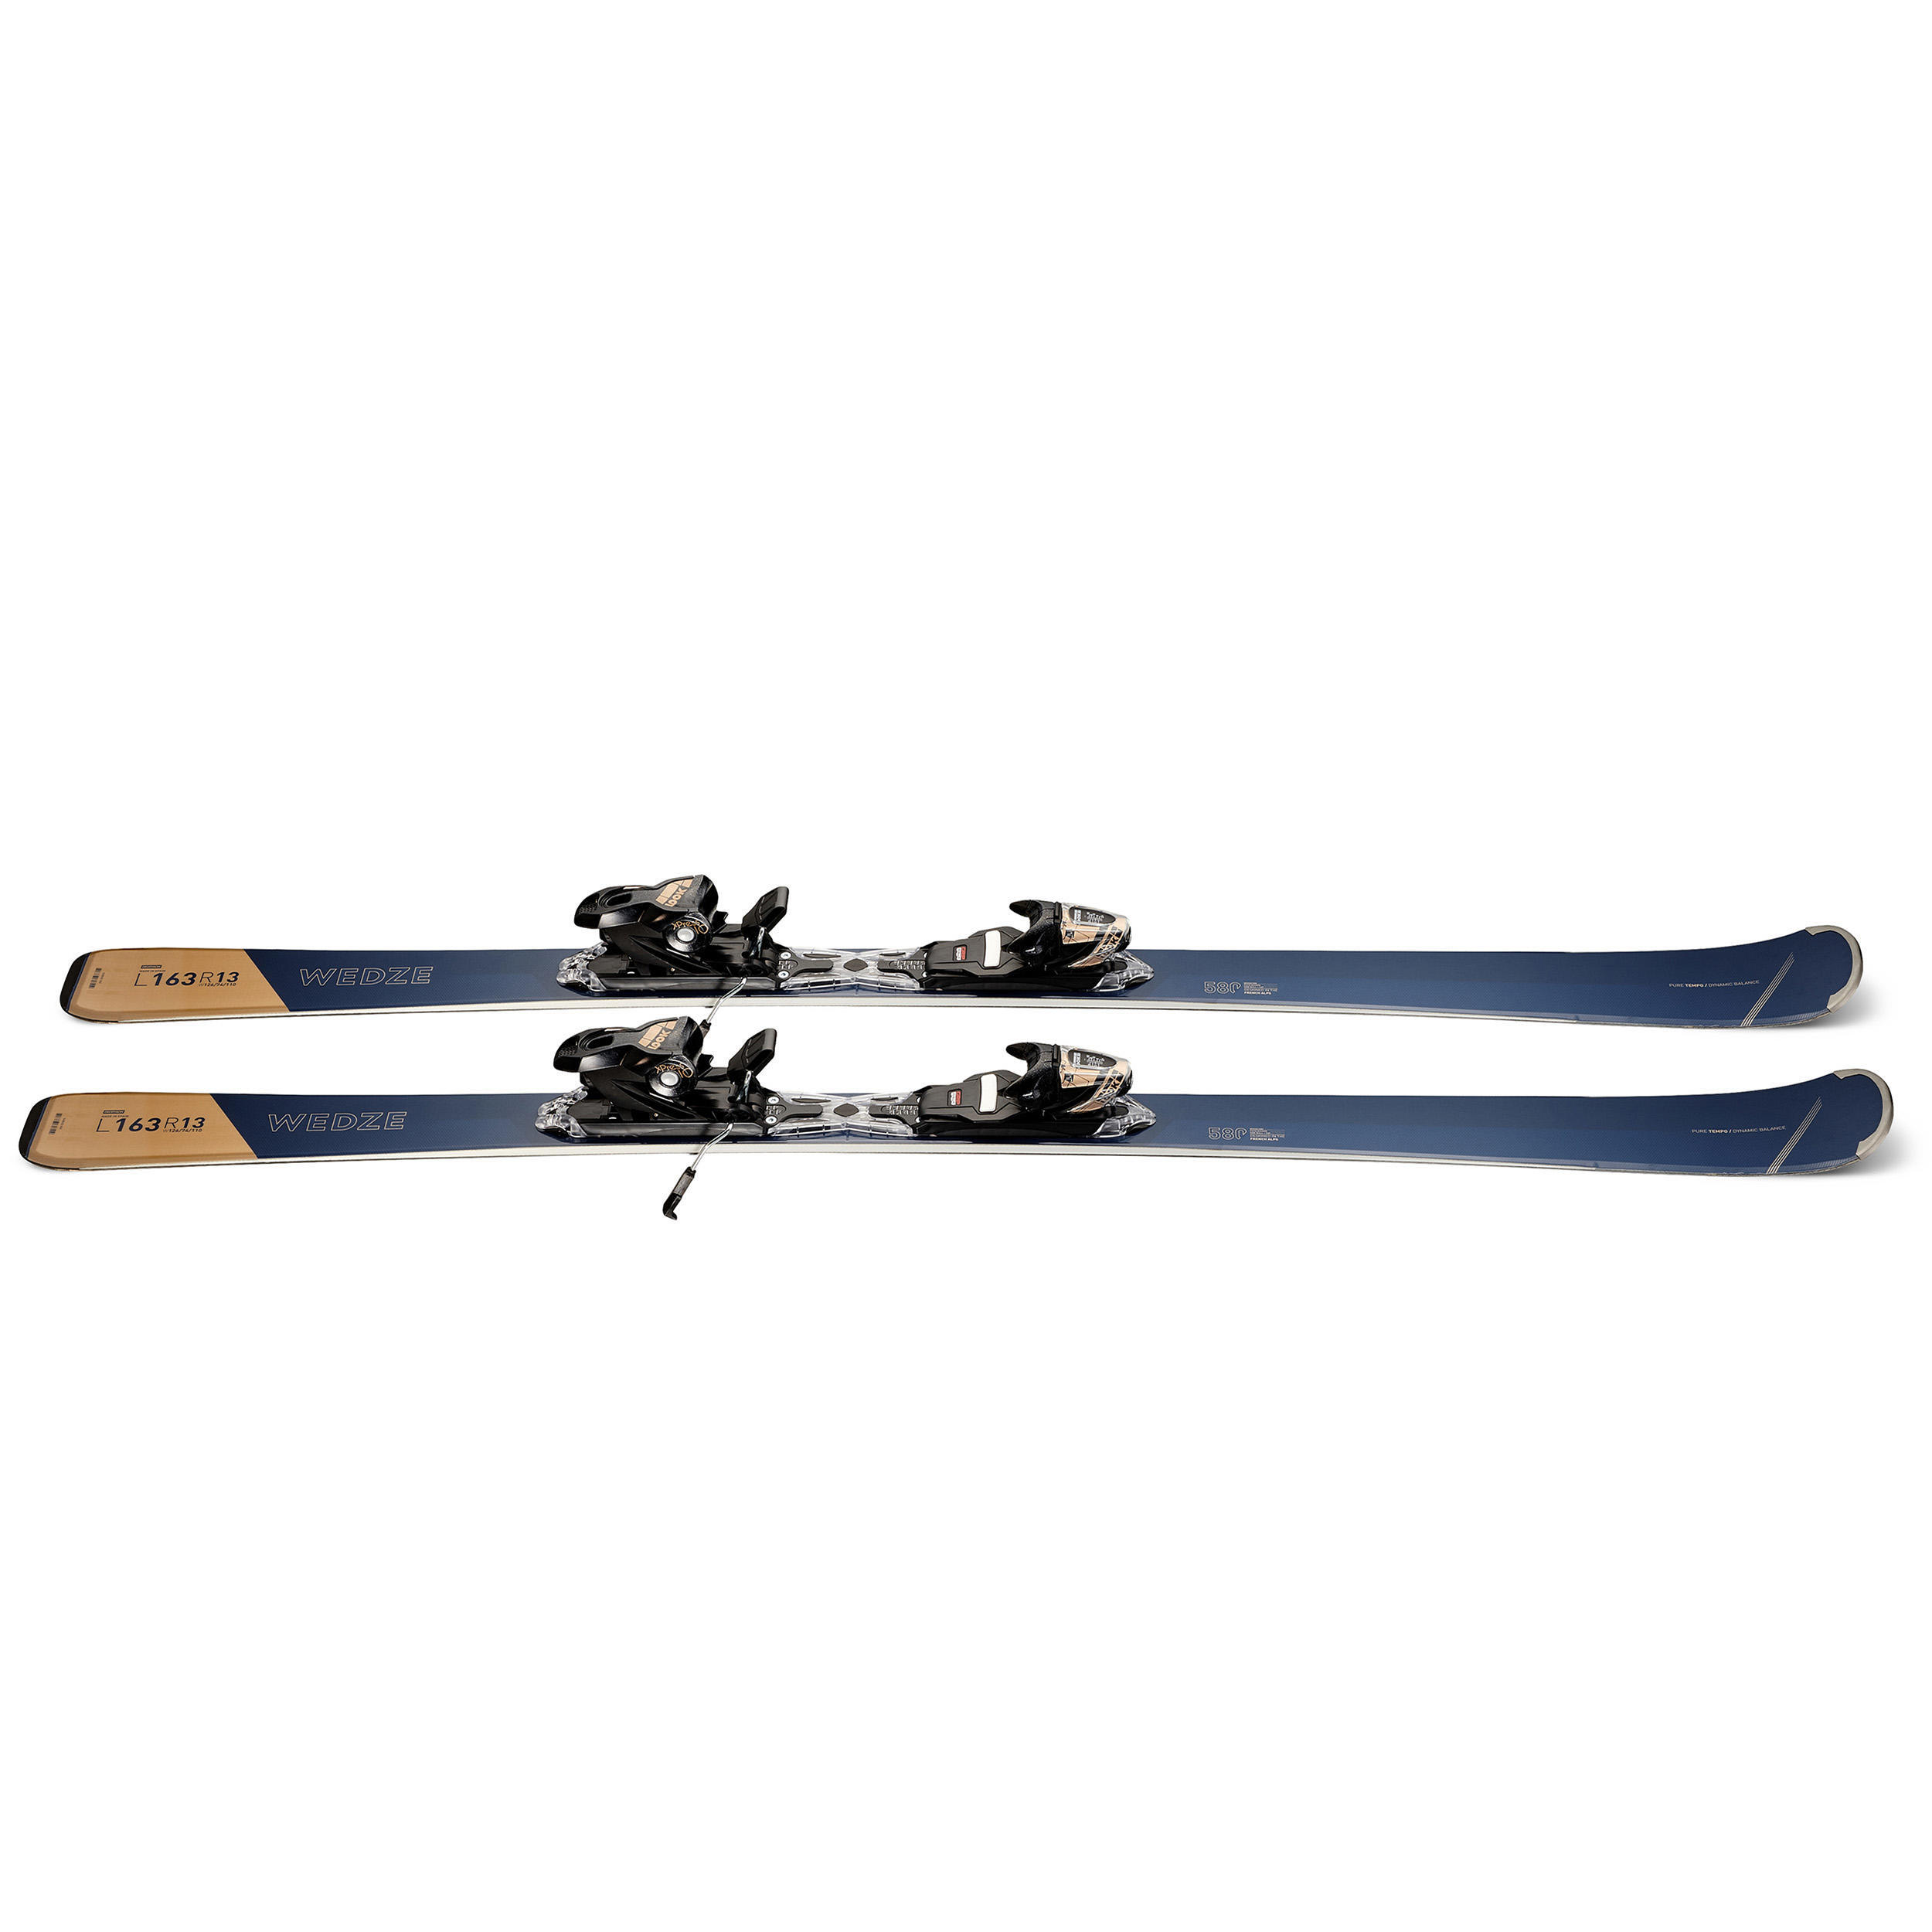 WOMEN’S ALPINE SKIS WITH BINDING - BOOST 580 - NAVY BLUE 2/7